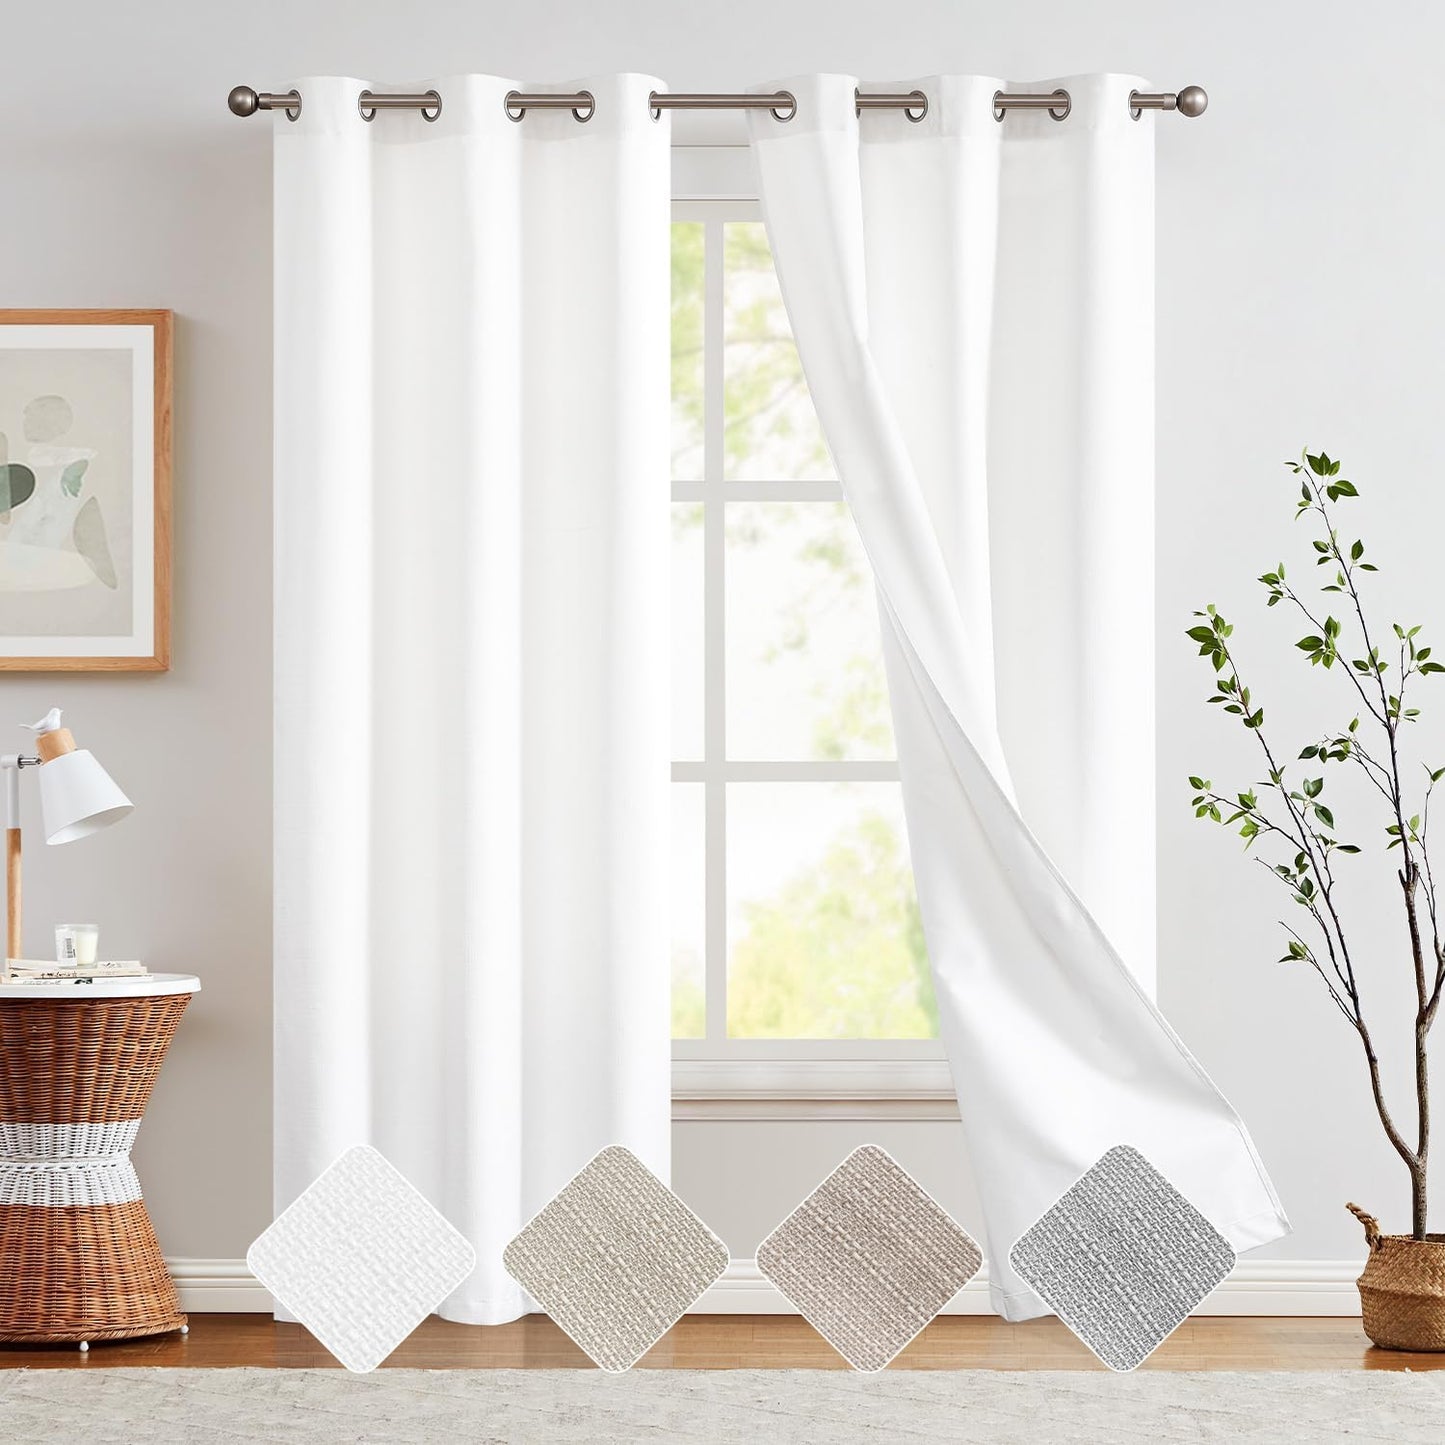 COLLACT White Linen Textured Curtains 84 Inch Length 2 Panels for Living Room Casual Weave Light Filtering Semi Sheer Curtains & Drapes for Bedroom Grommet Top Window Treatments, W38 X L84, White  COLLACT Blackout | Textured White W38 X L96 